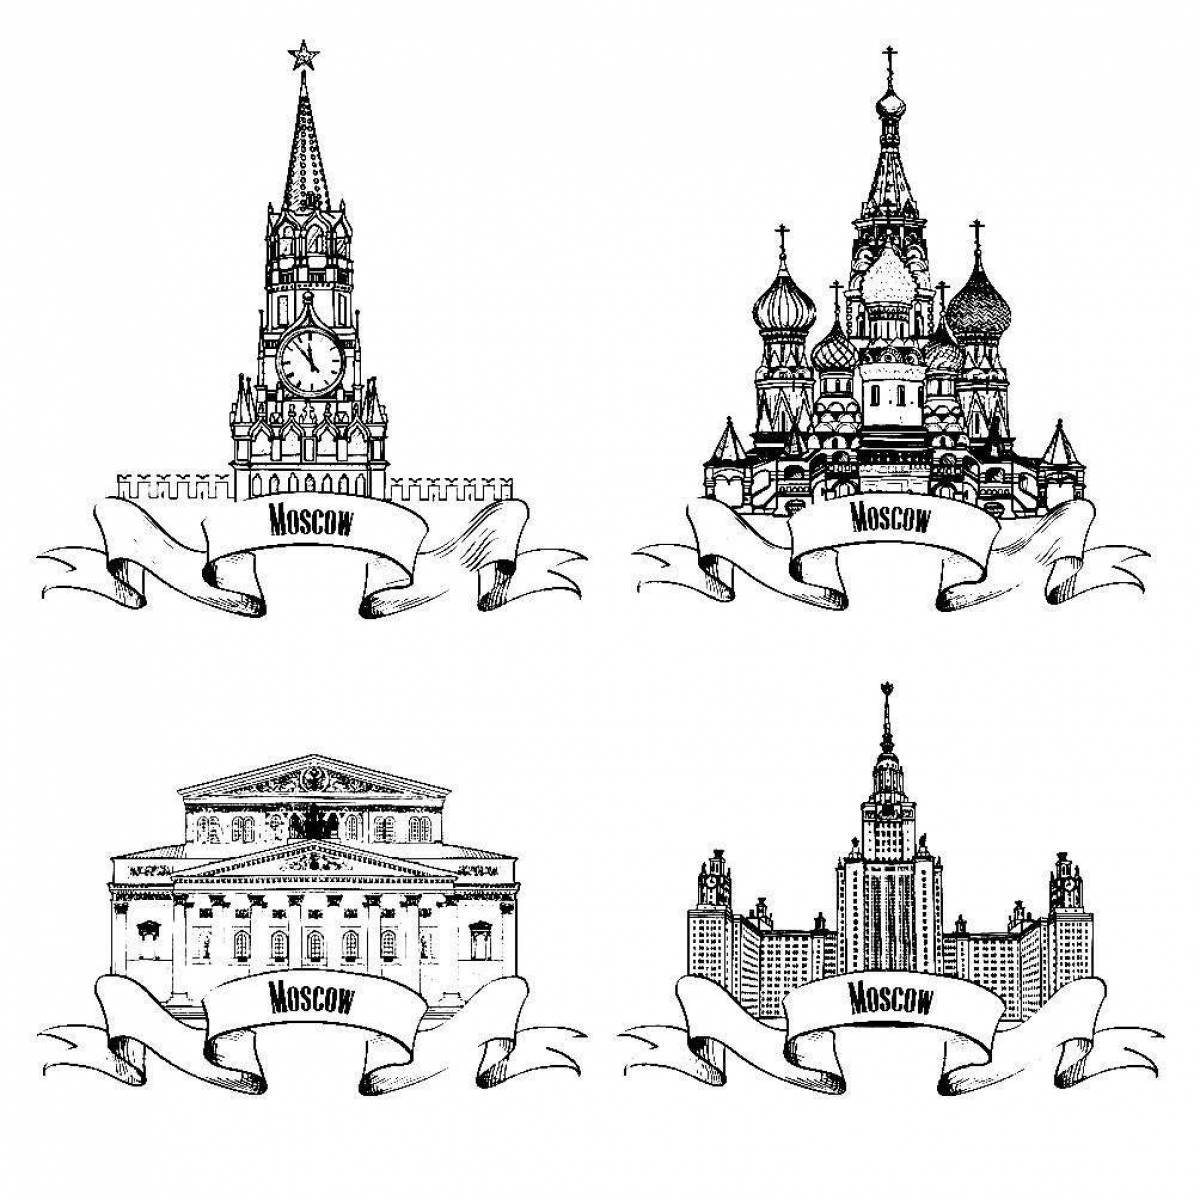 Coloring pages of moscow, the capital of russia for kids